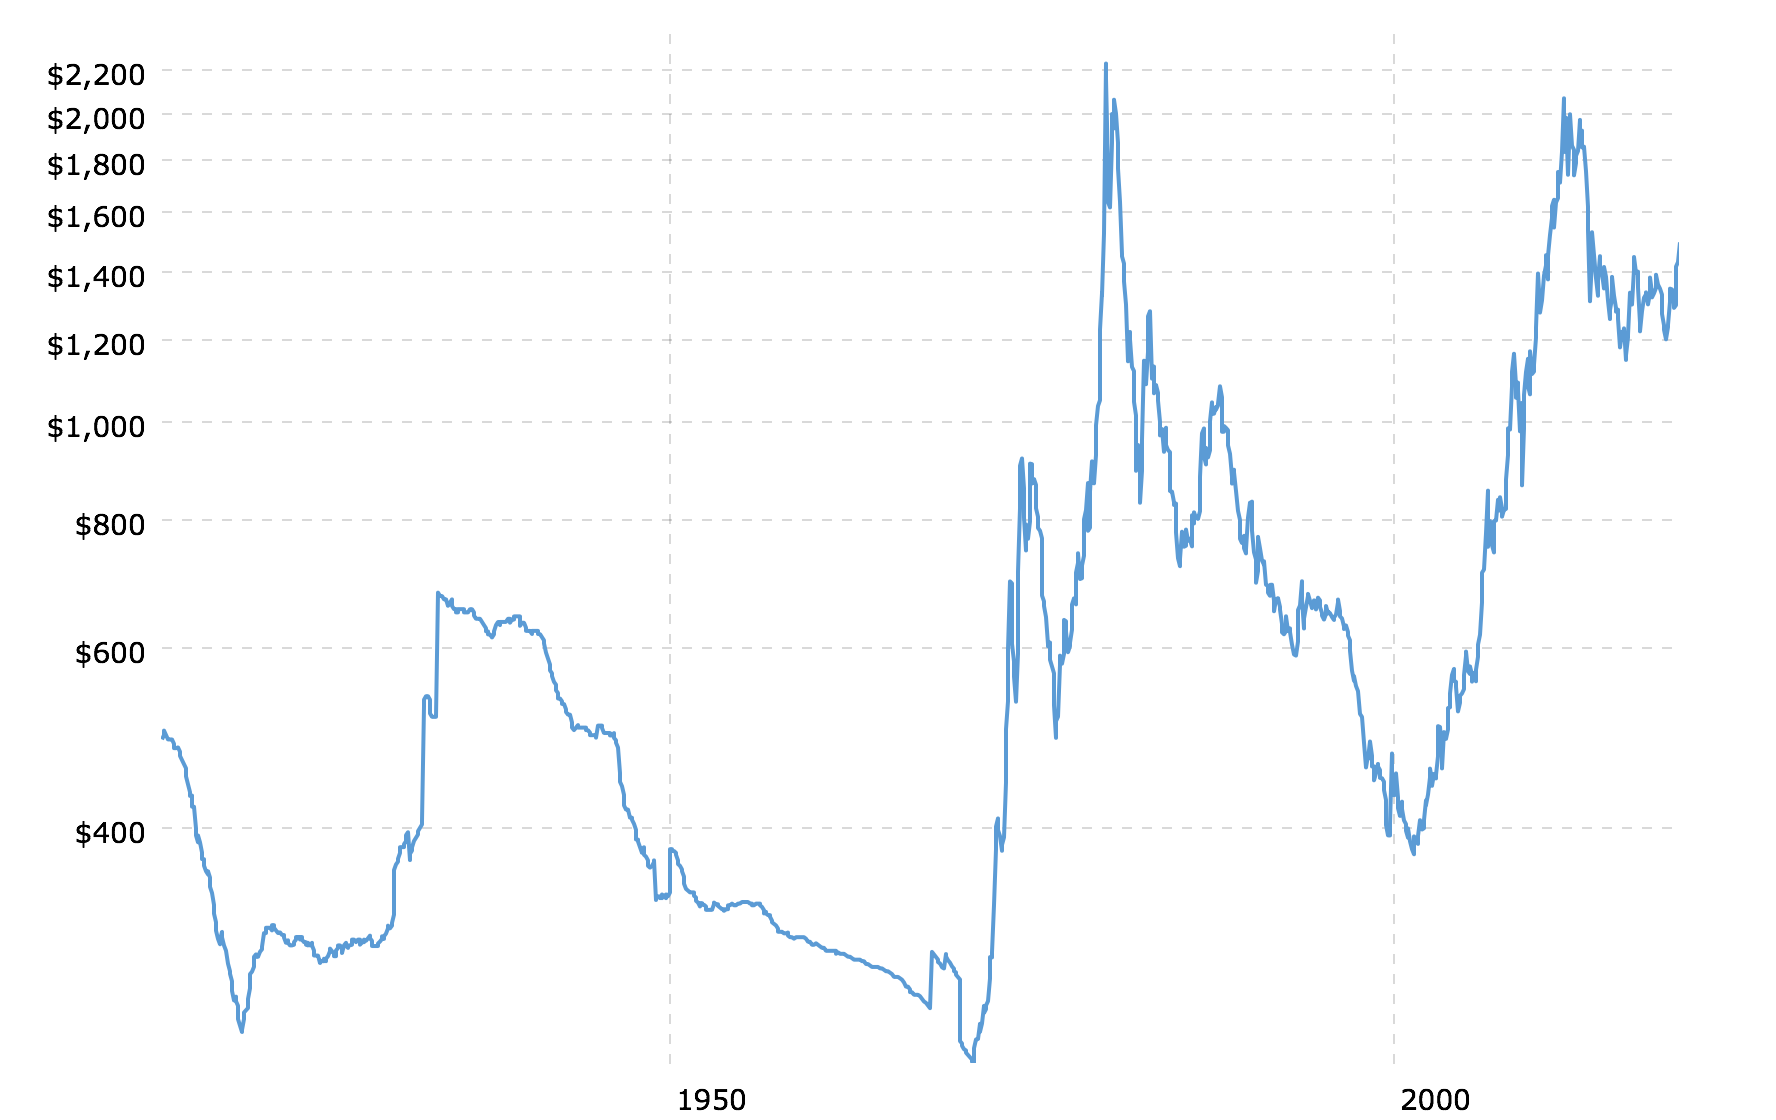 historical-gold-prices-100-year-chart-2019-08-26-macrotrends-kelsey-s-gold-facts